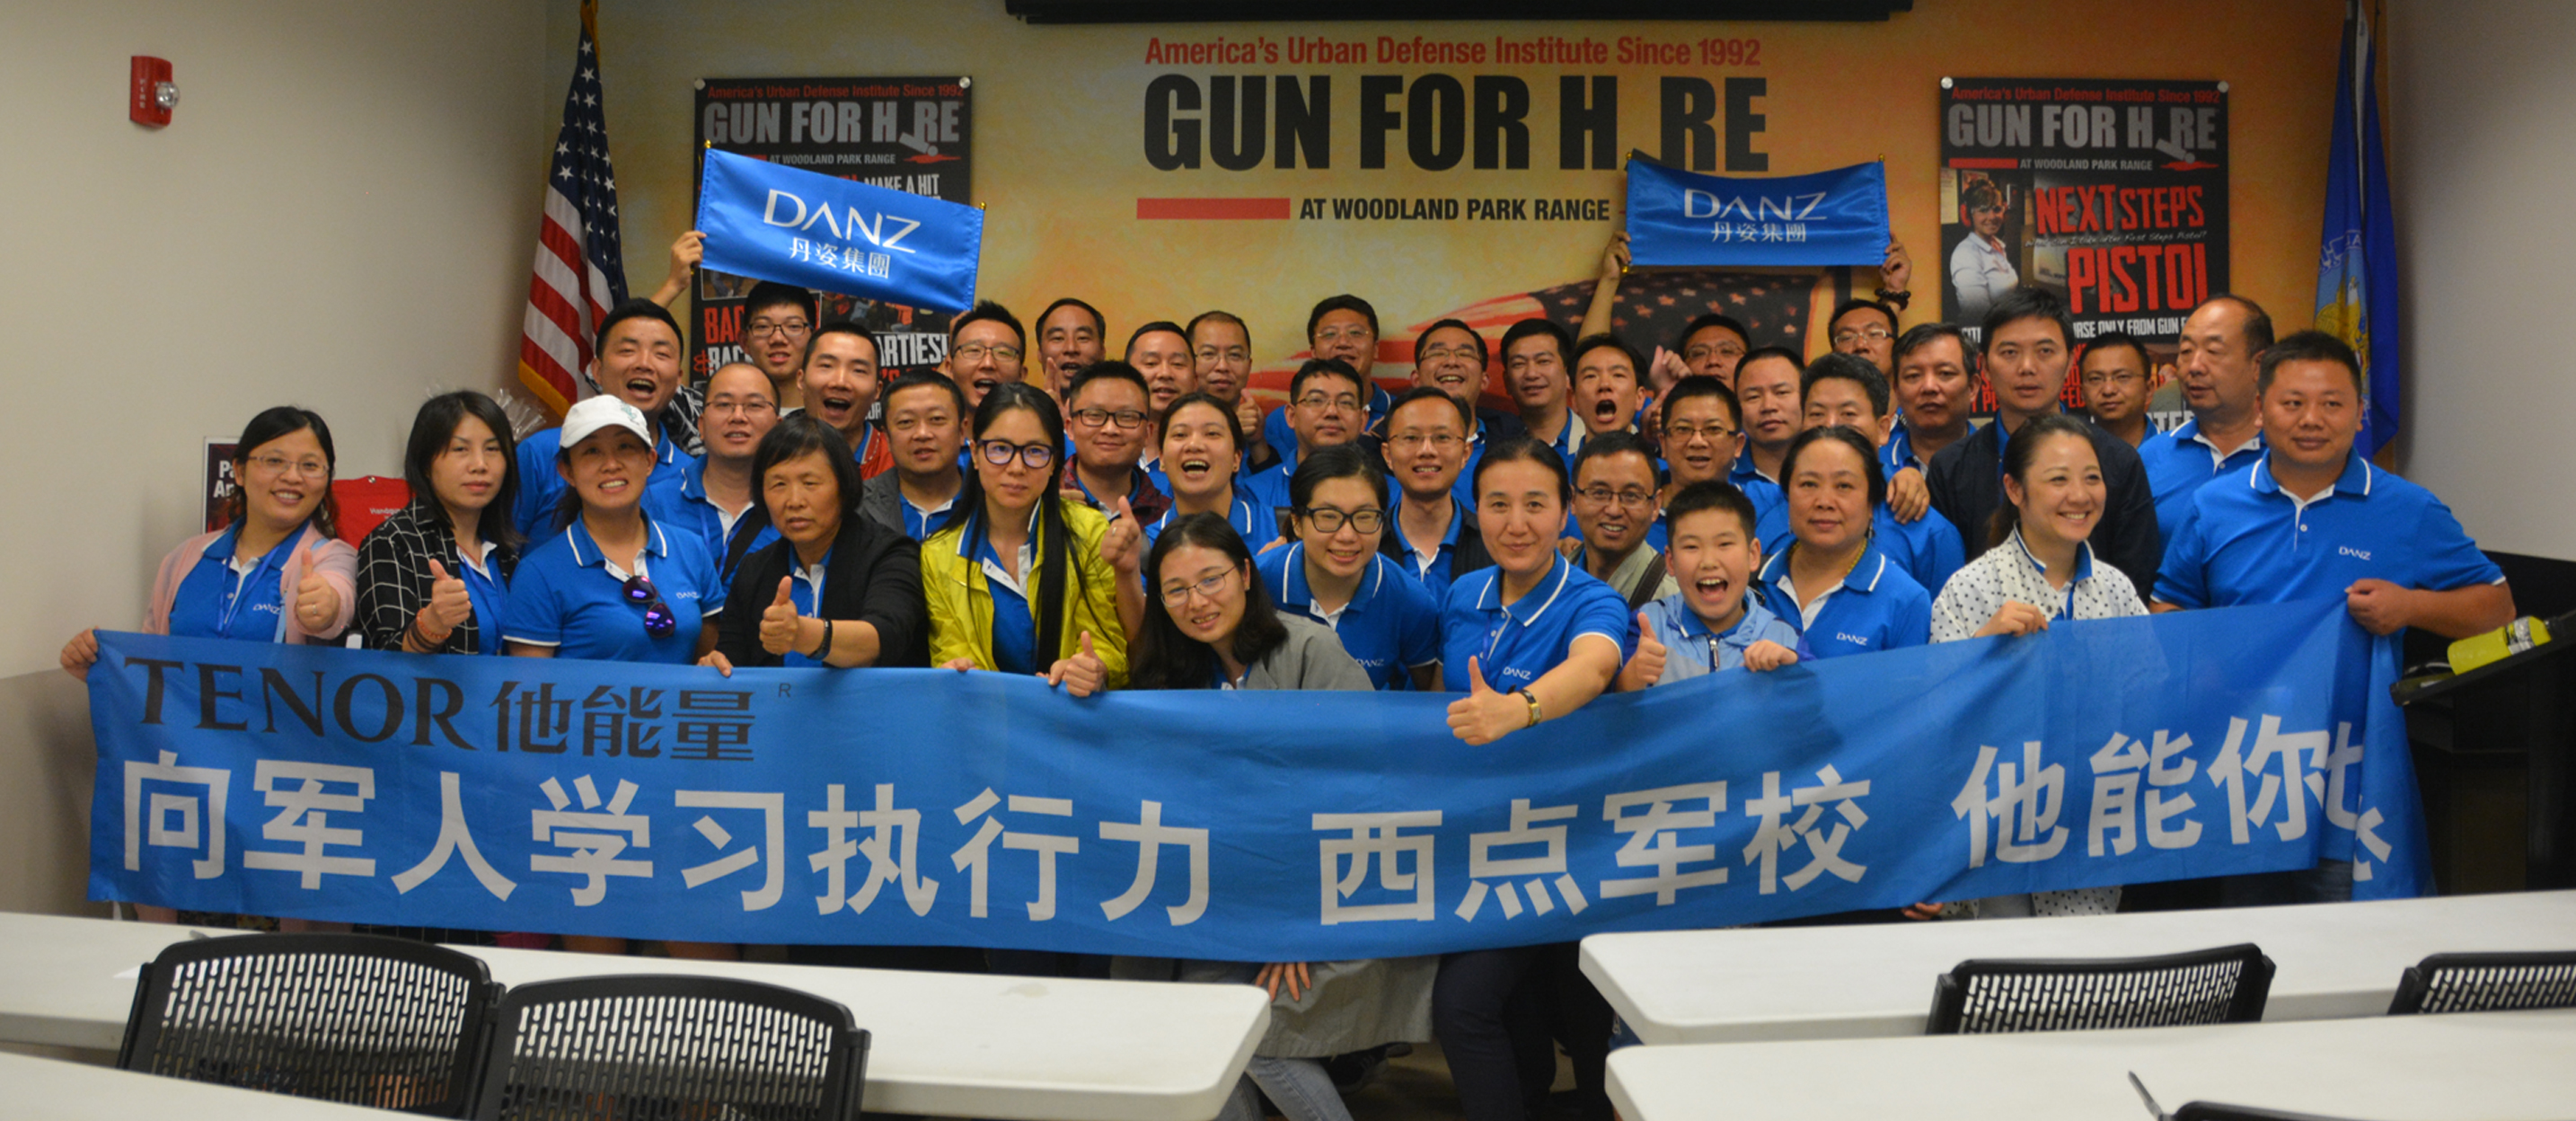 Chinese shooting party 1 - Gun For Hire welcomes the United Kingdom community to the gun range